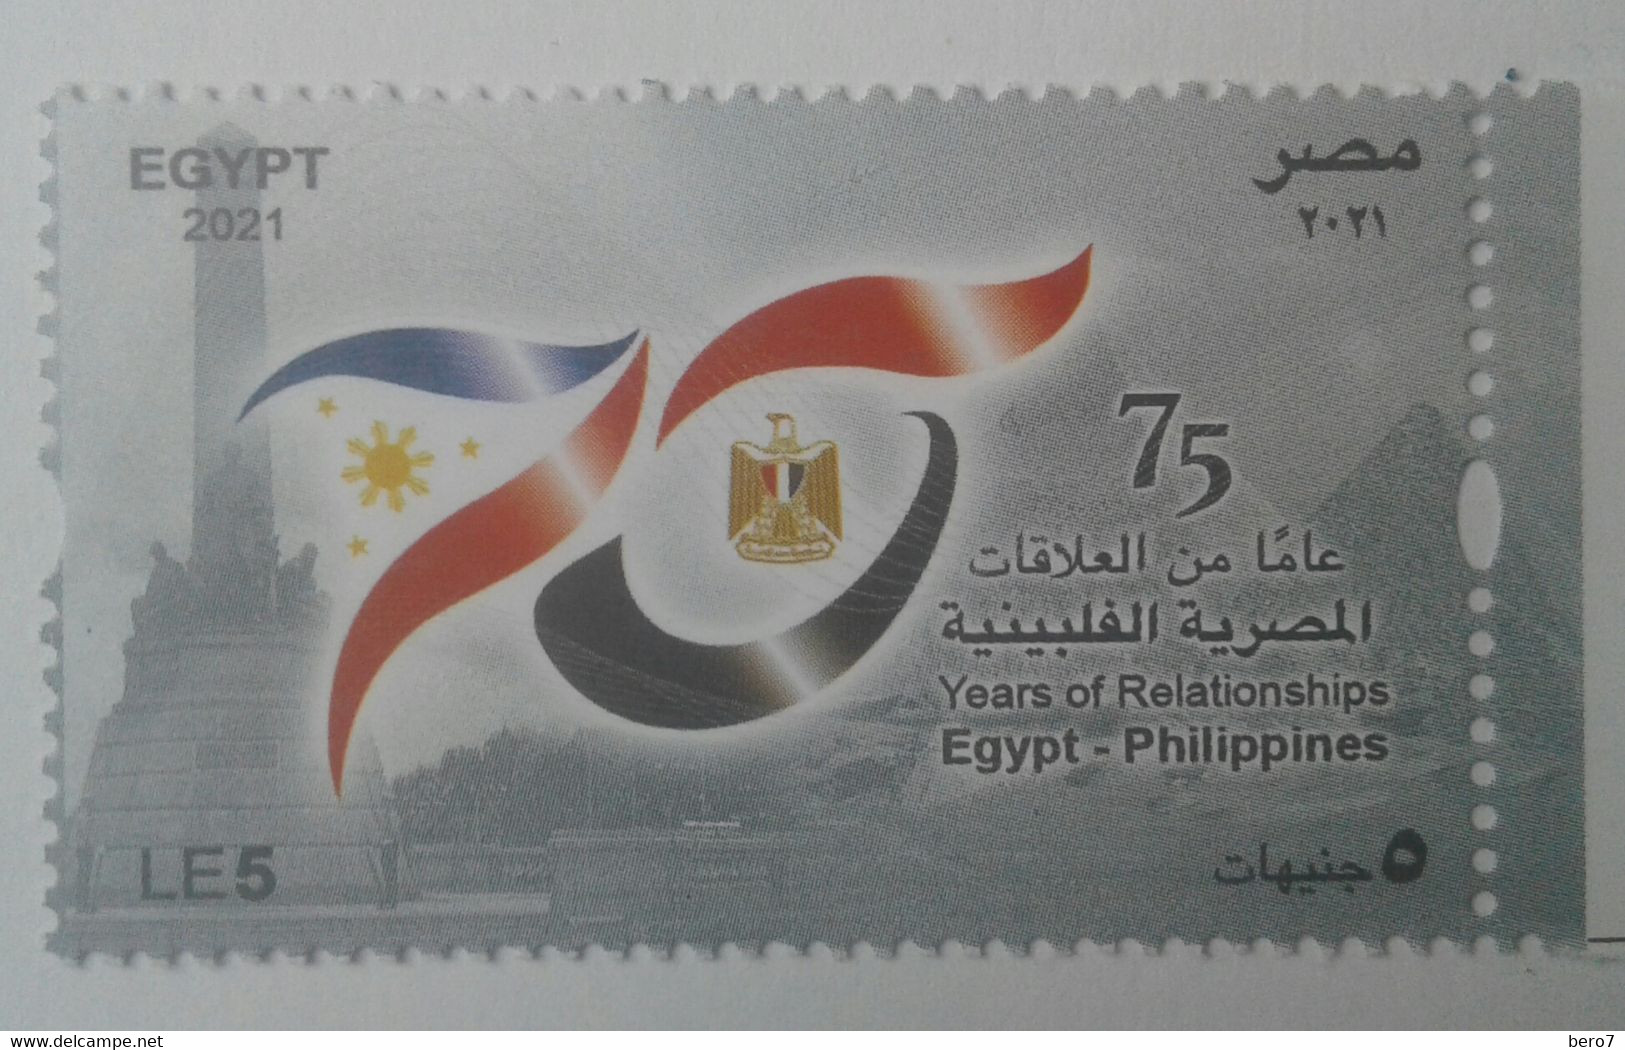 Egypt-Diplomatic Relations With The Philippines, 75th Anniversary- (Unused) (MNH) - [2021] (Egypte) (Egitto) (Ägypten) - Nuovi